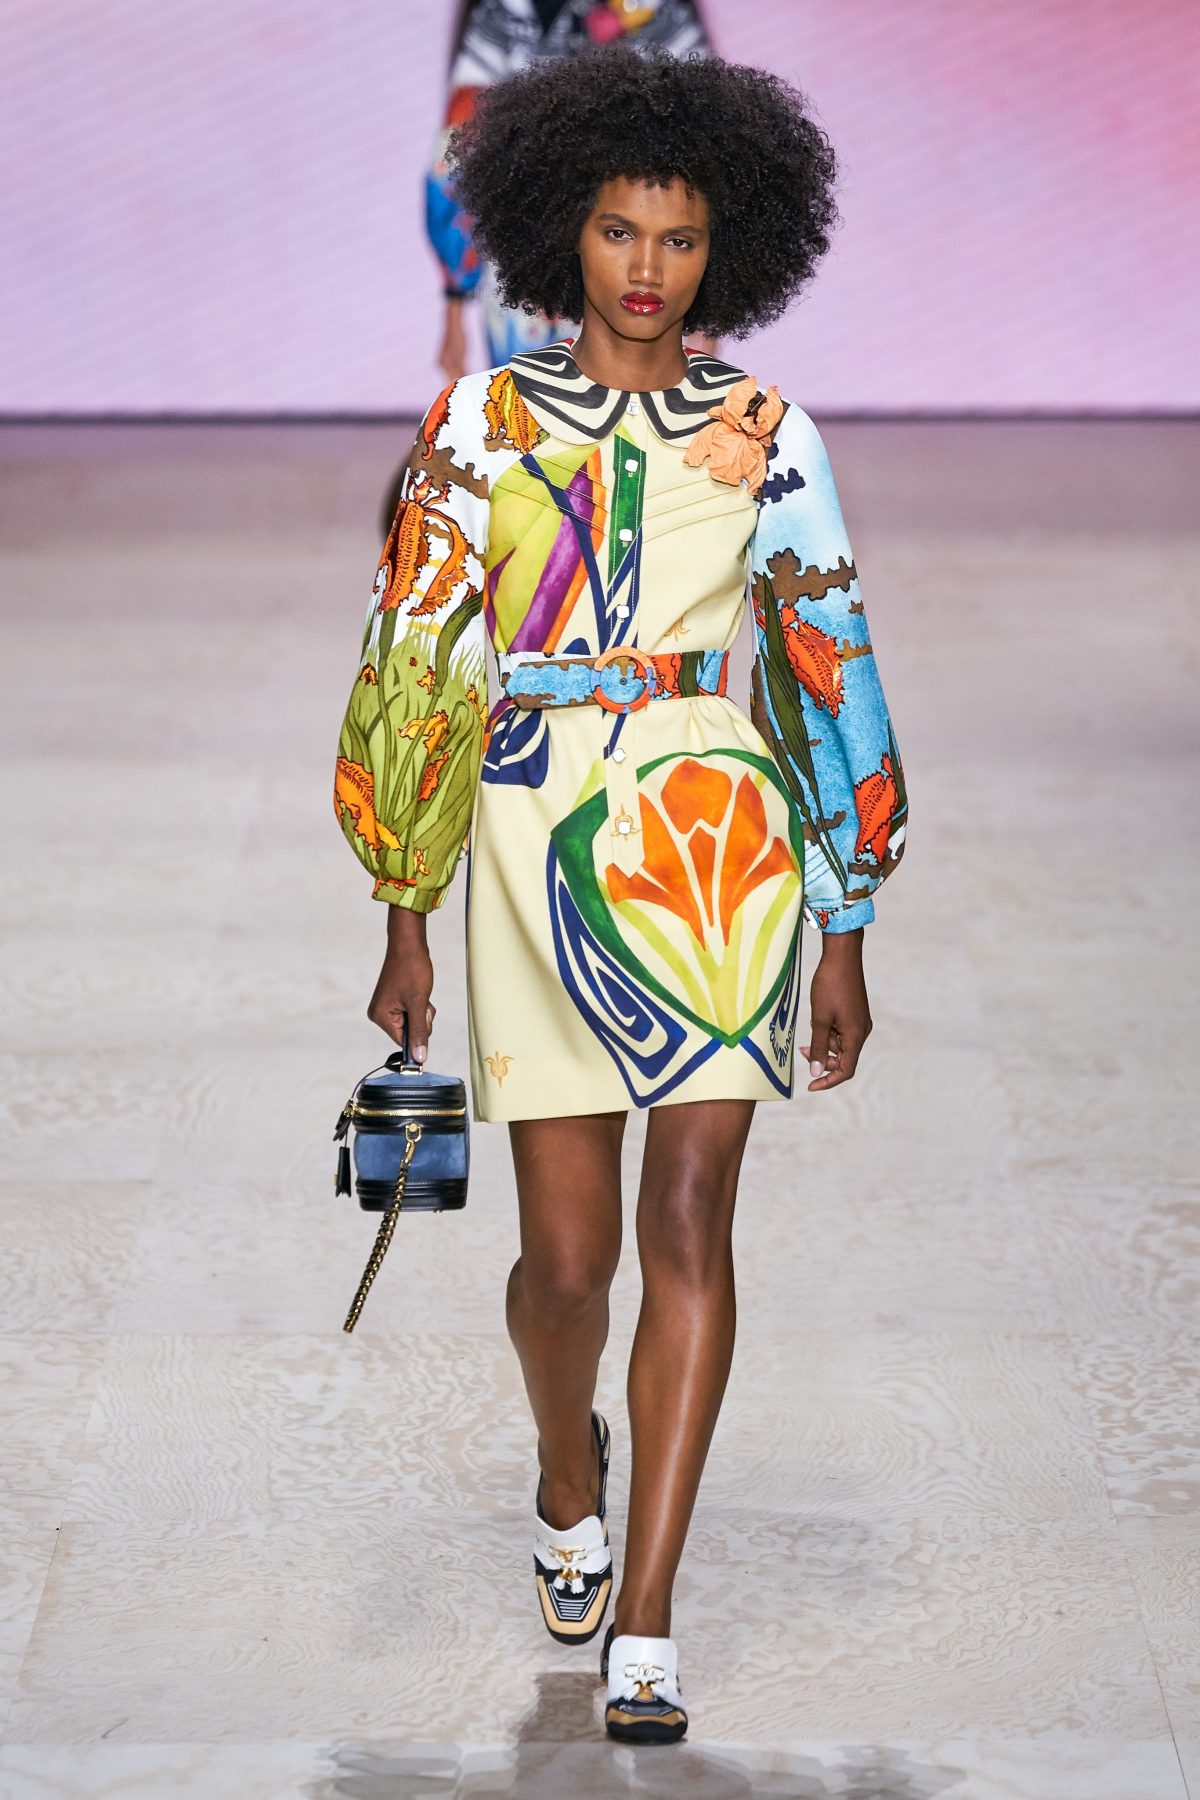 Paris Fashion Week: Louis Vuitton Spring/Summer 2012 - A Show of  Extraordinary Proportions!! - BagAddicts Anonymous